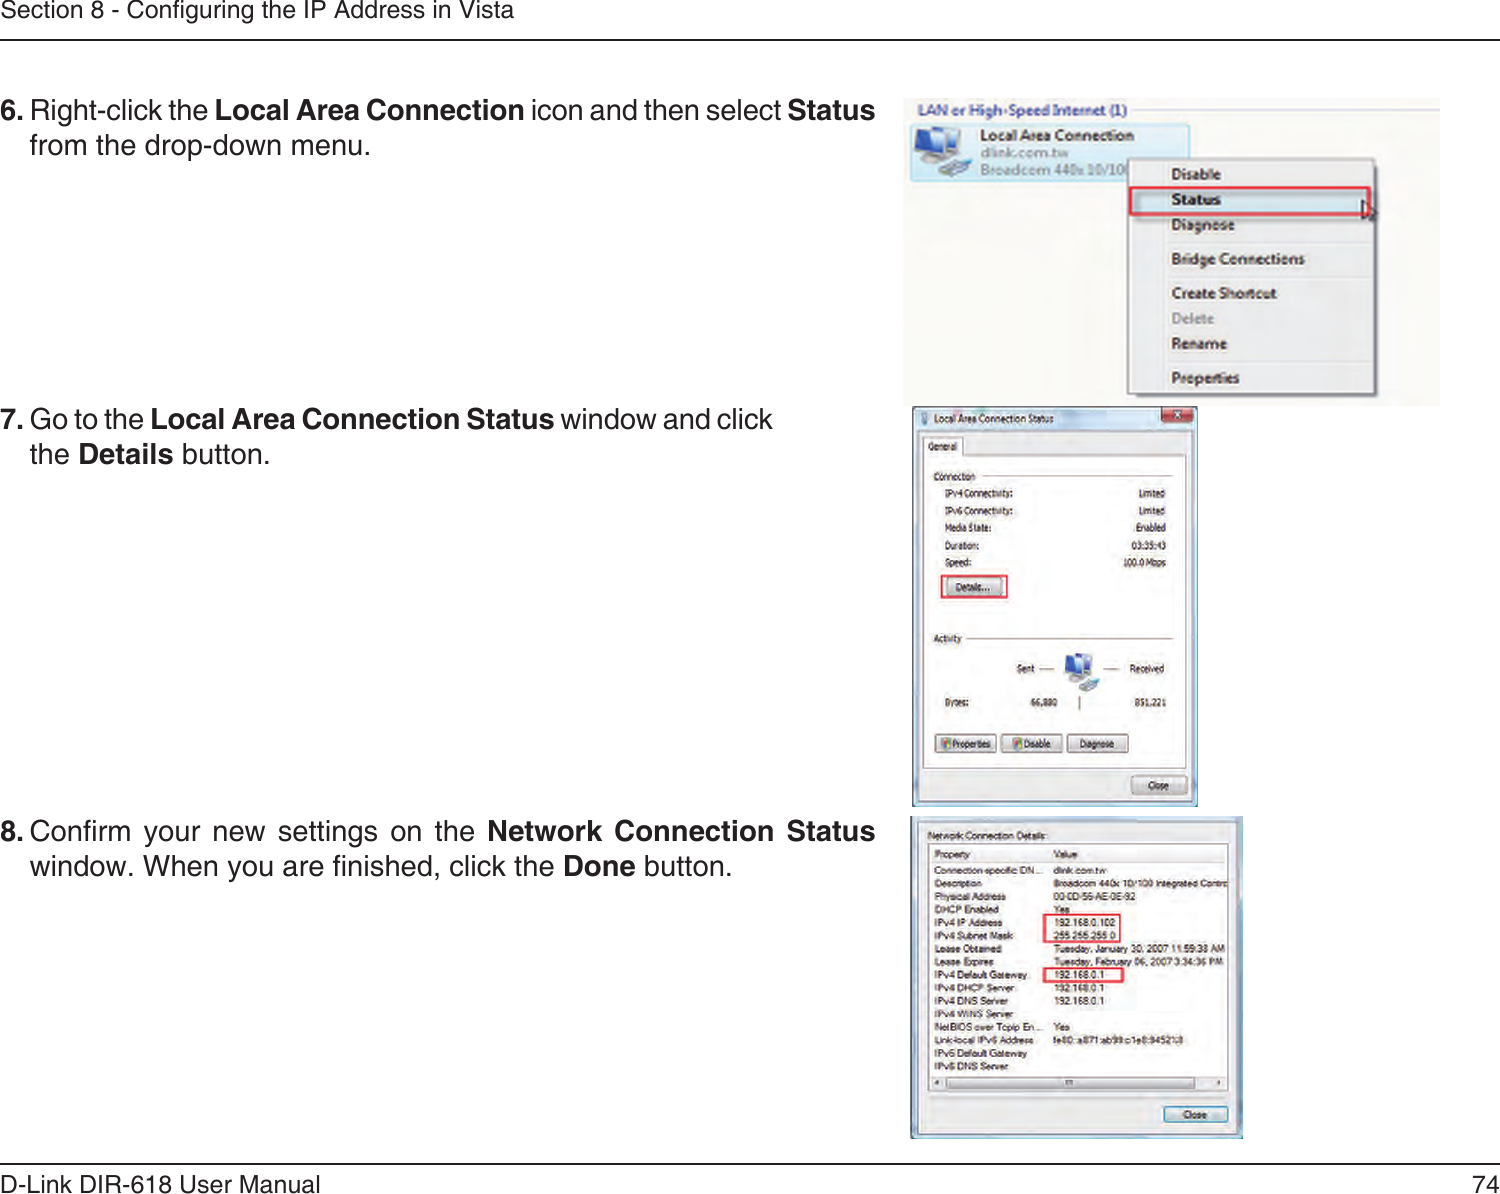 74D-Link DIR-618 User ManualSection 8 - Conguring the IP Address in Vista6. Right-click the Local Area Connection icon and then select Statusfrom the drop-down menu. 7. Go to the Local Area Connection Status window and clickthe Details button. 8. Conrm your new settings on the Network Connection Status window. When you are nished, click the Done button. 